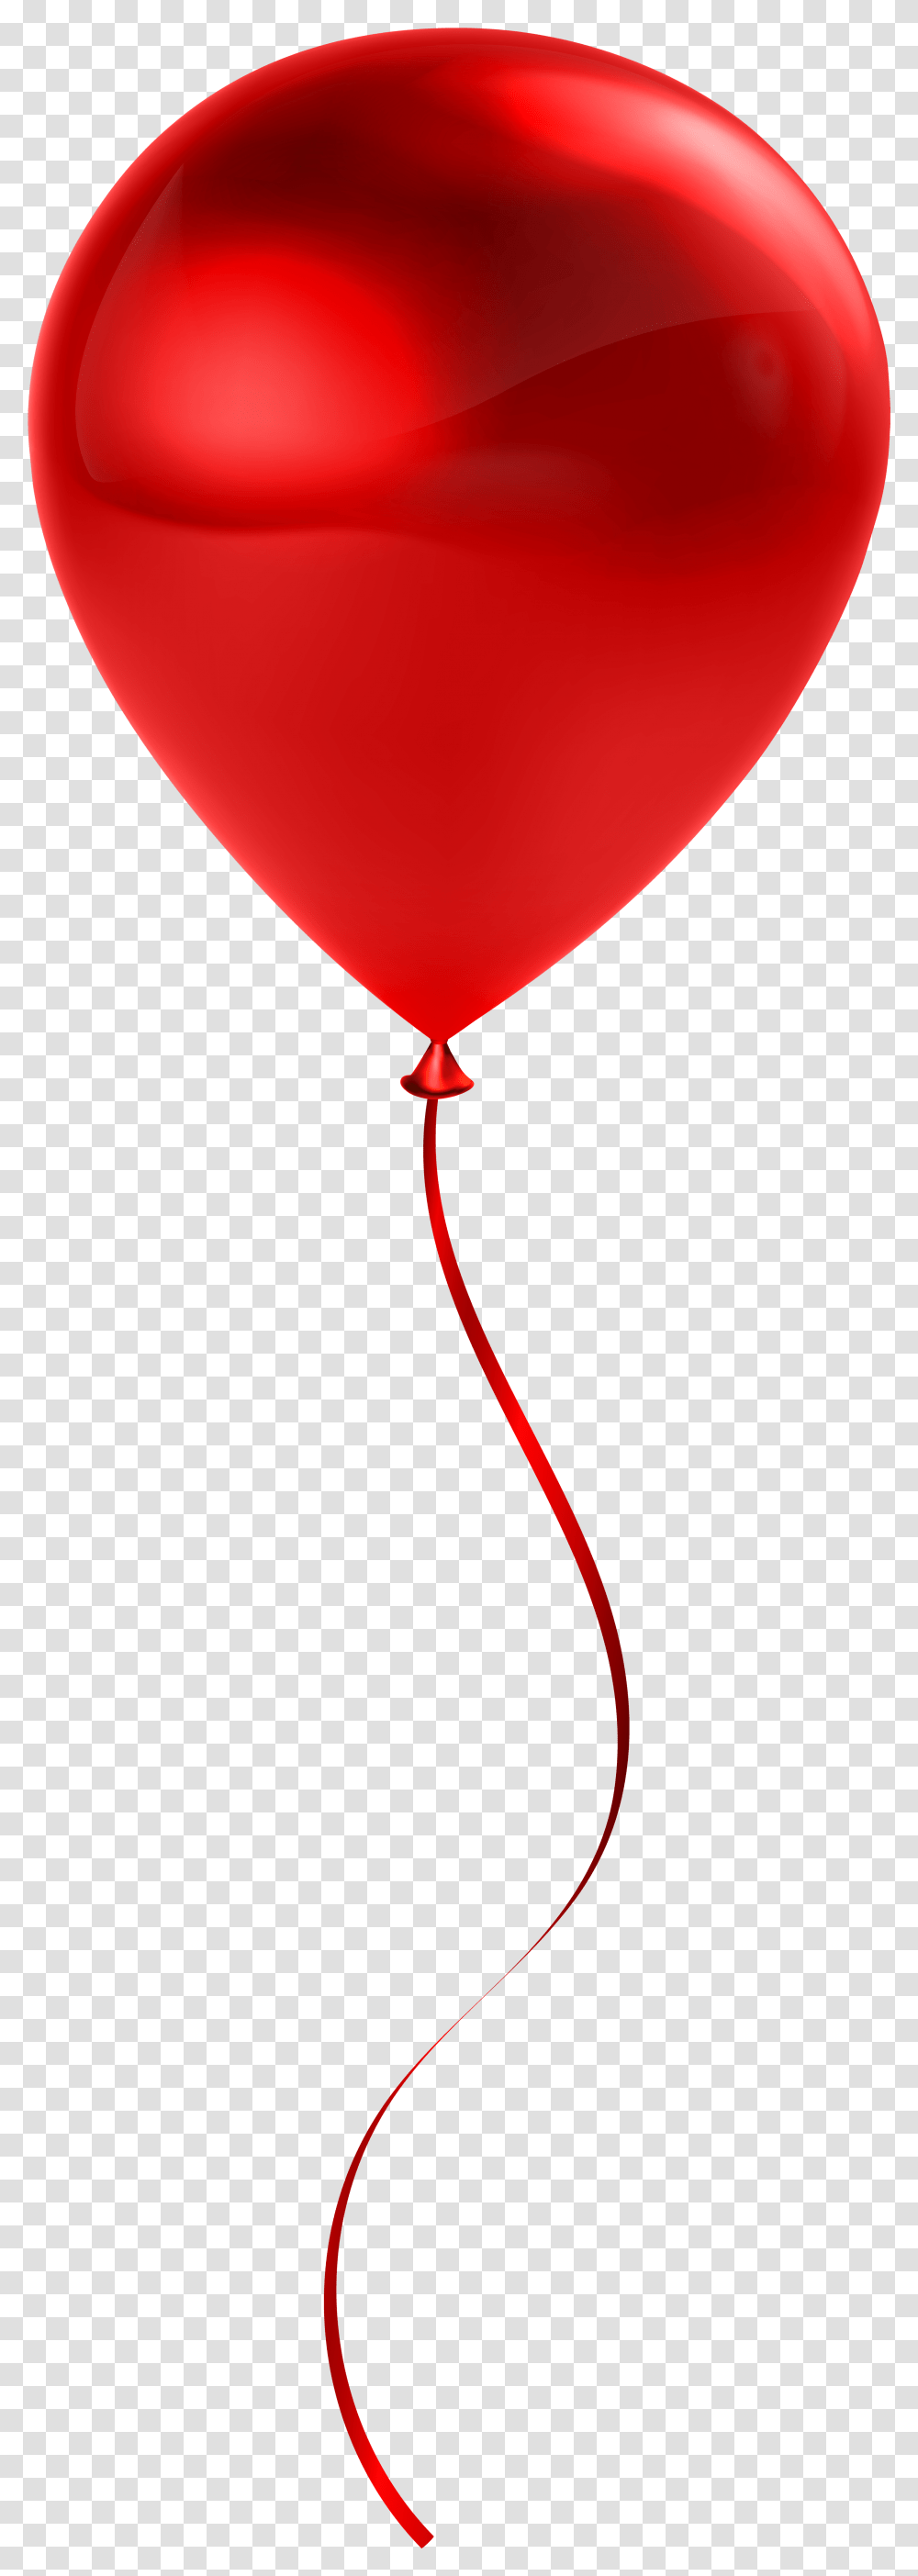 Two Heart Red Balloon Background Transparent Png